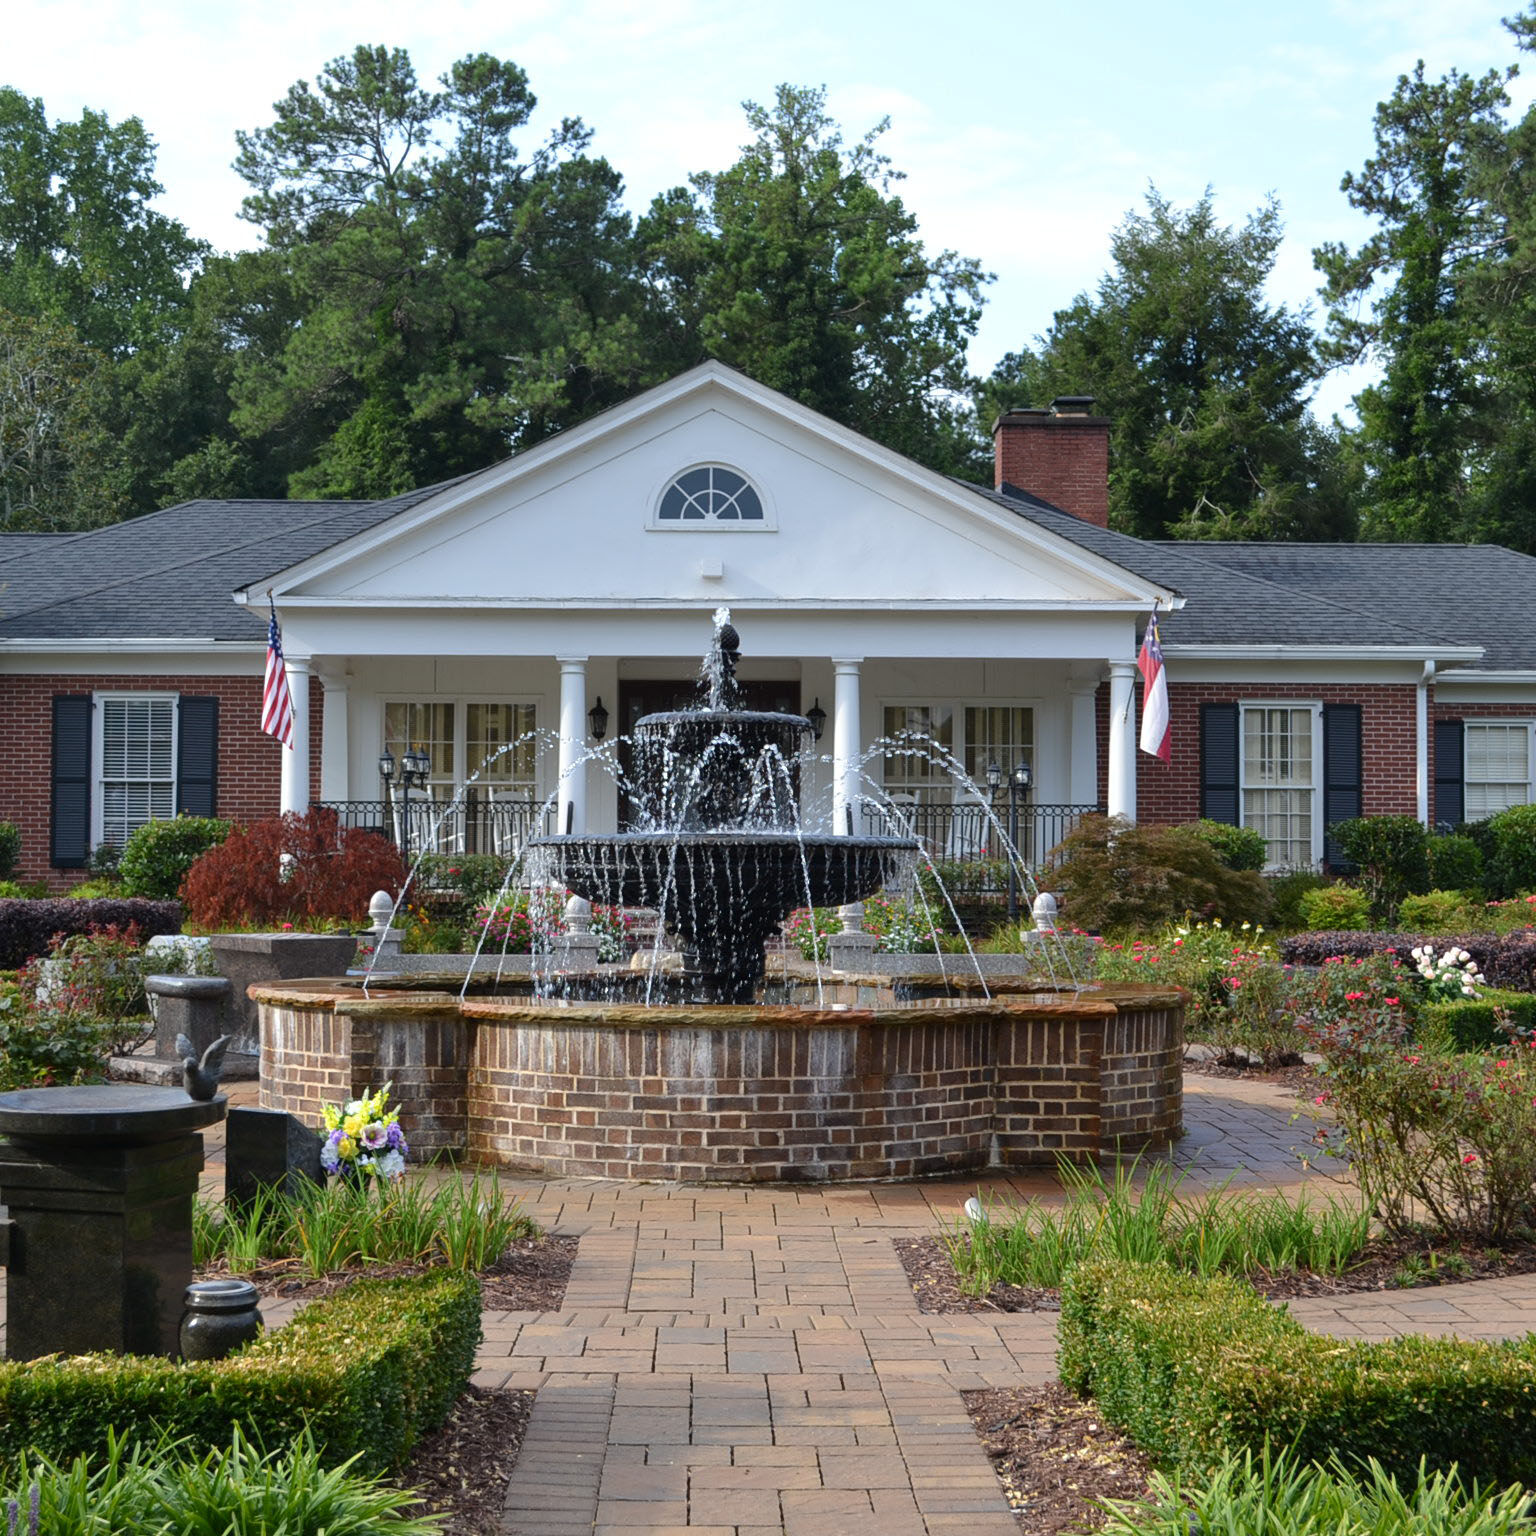 Southern Cremations & Funerals 431 SW Broad St, Fairburn Georgia 30213